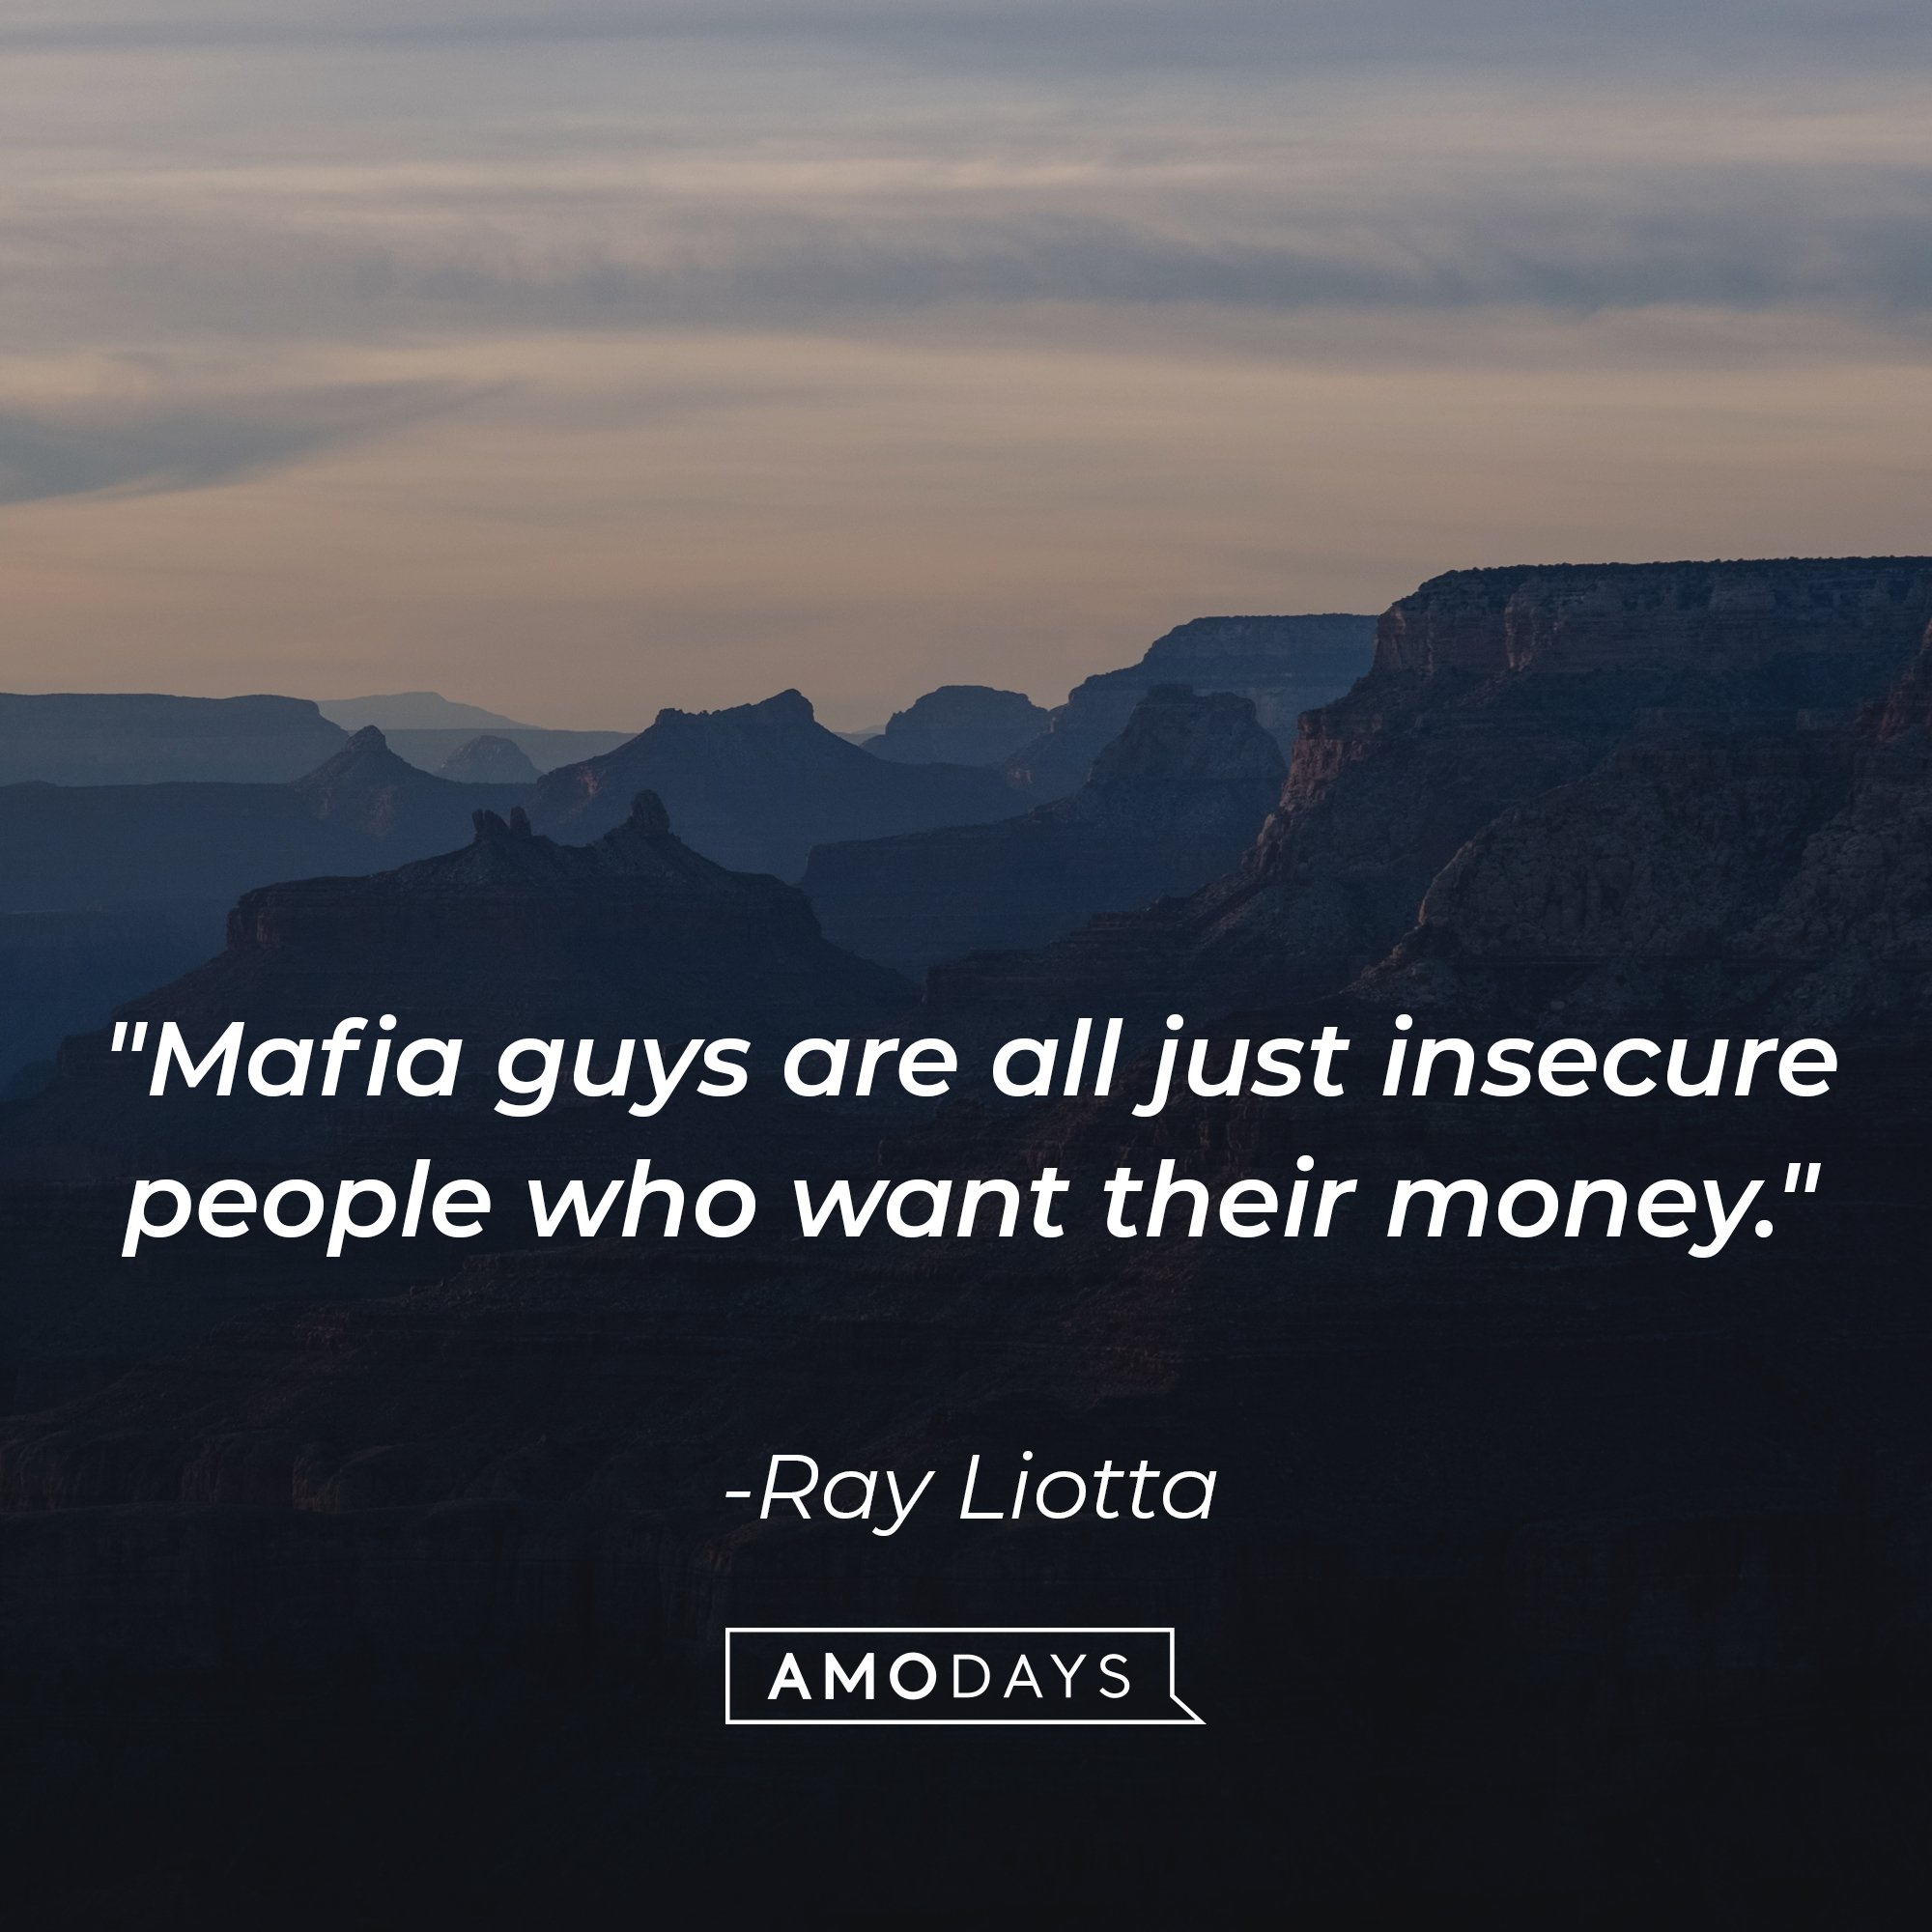 Ray Liotta’s quote: "Mafia guys are all just insecure people who want their money." | Image: AmoDays